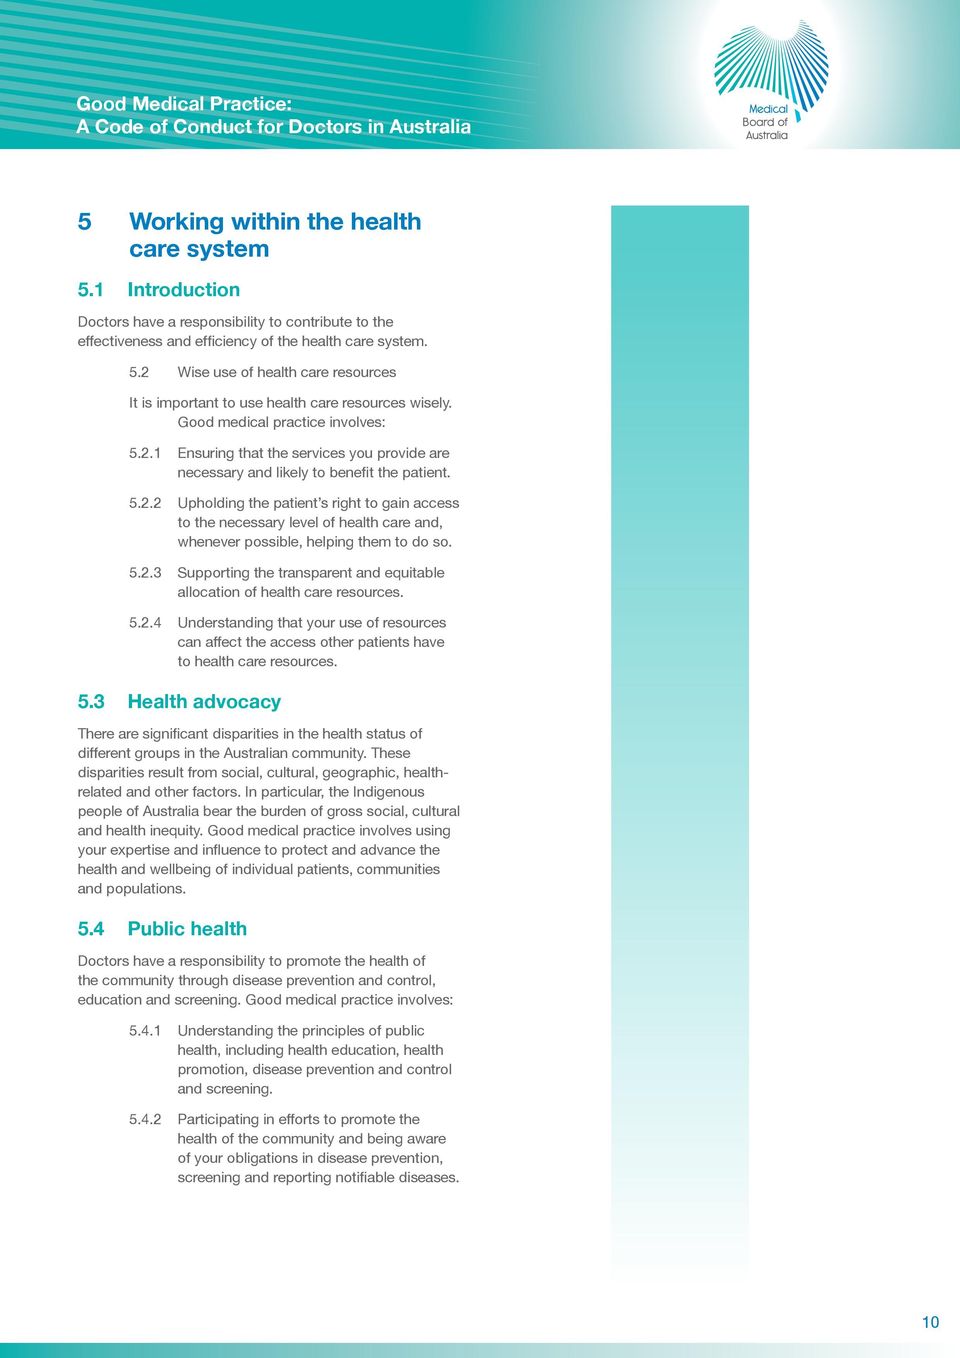 5.2.3 Supporting the transparent and equitable allocation of health care resources. 5.2.4 Understanding that your use of resources can affect the access other patients have to health care resources.